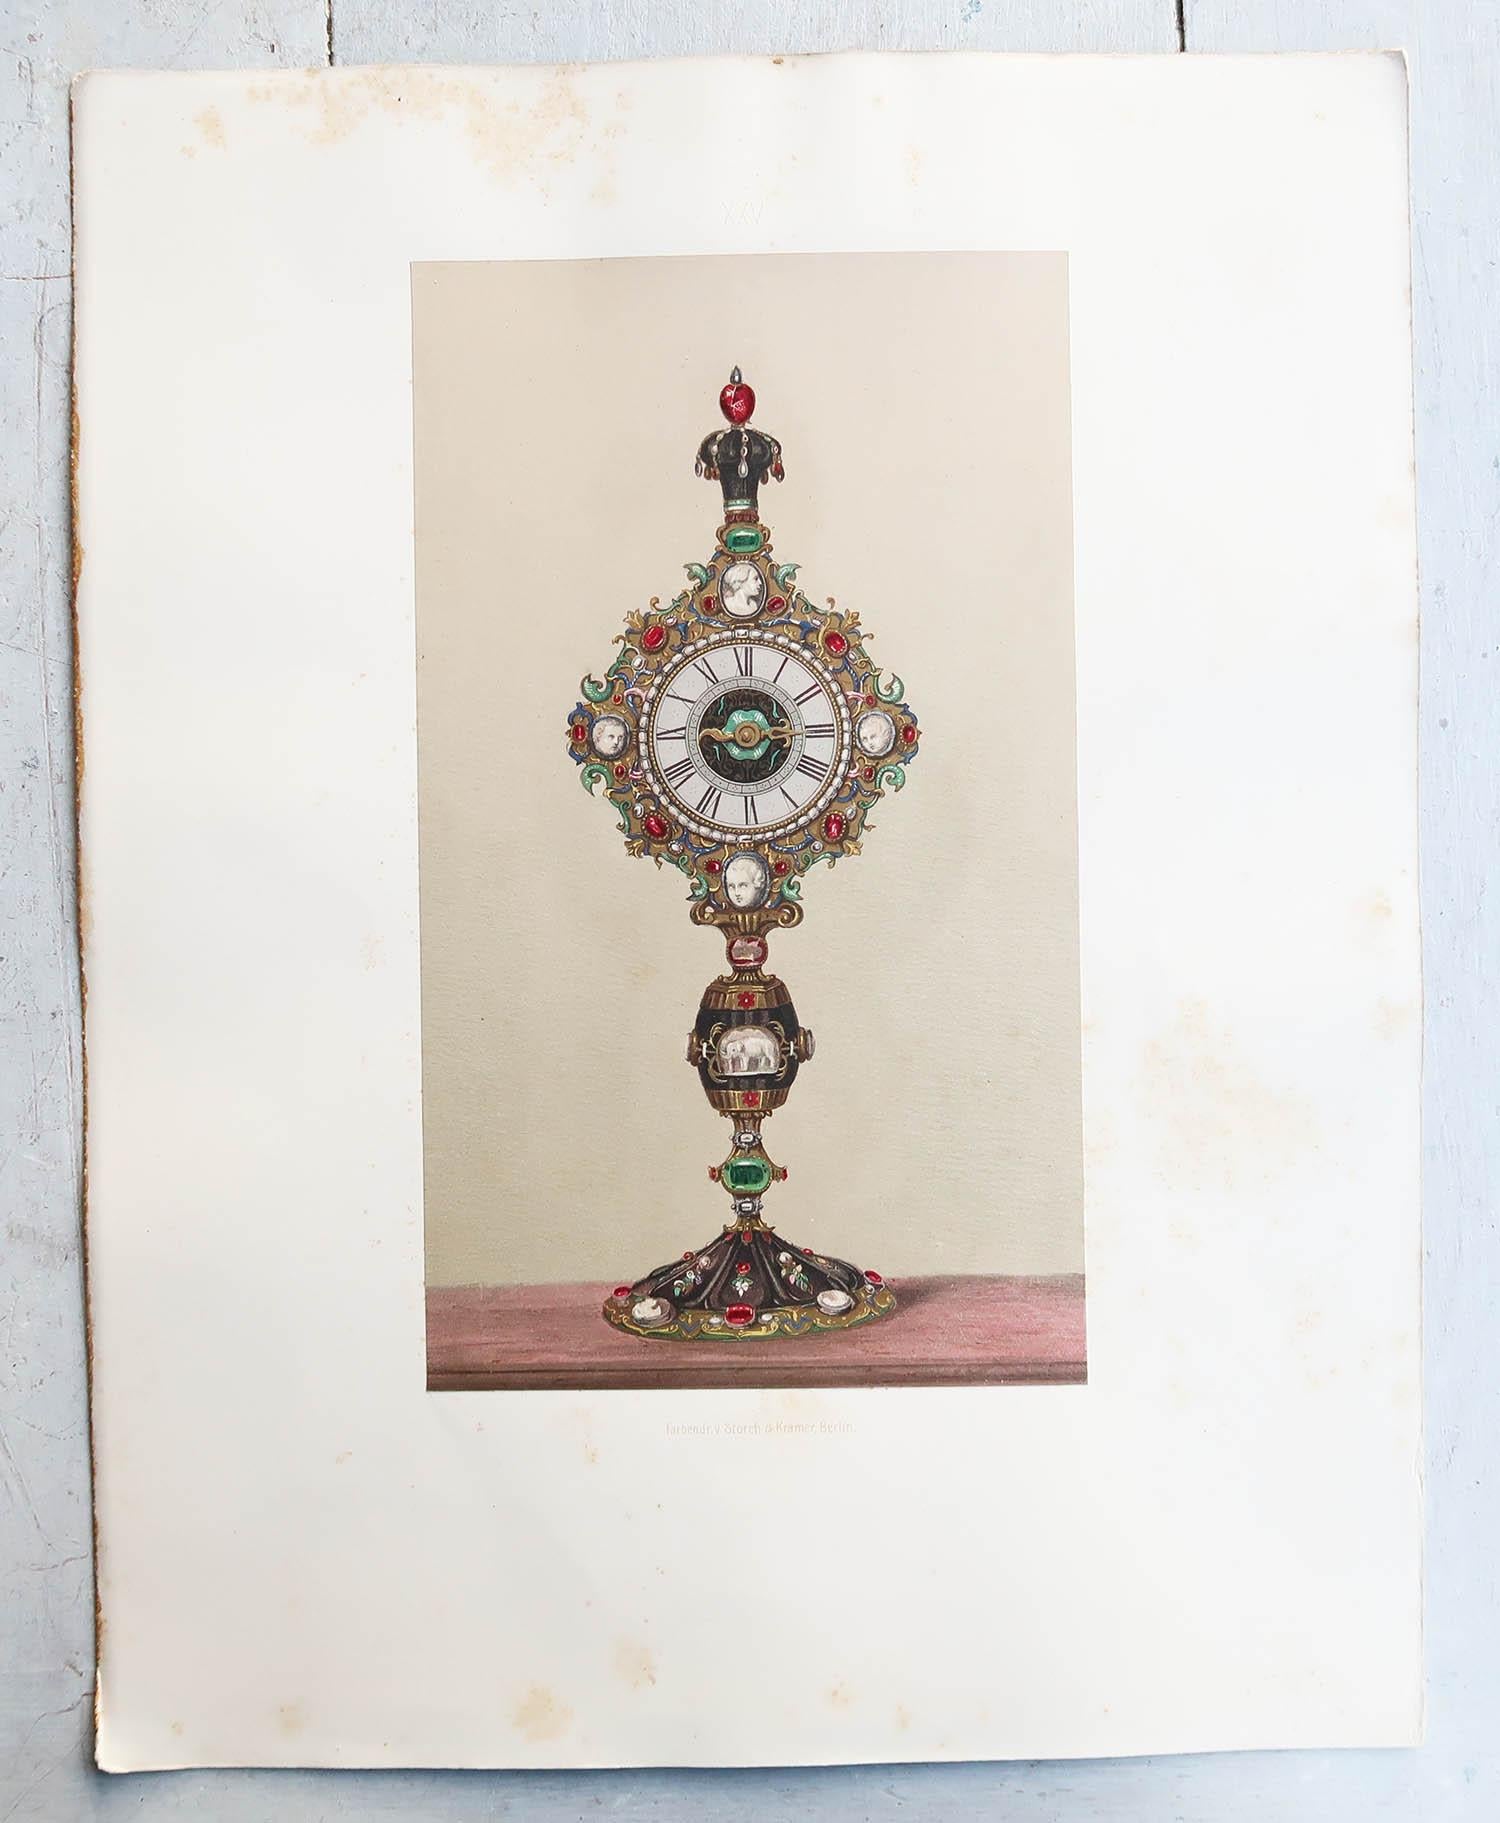 Superb set of 5 prints of European Art Treasures

Chromolithographs

Published by Louis Gruner, 1862.

The prints are in good condition. The white mounts have condition issues. This can be seen in the images

The measurement given is the size of the